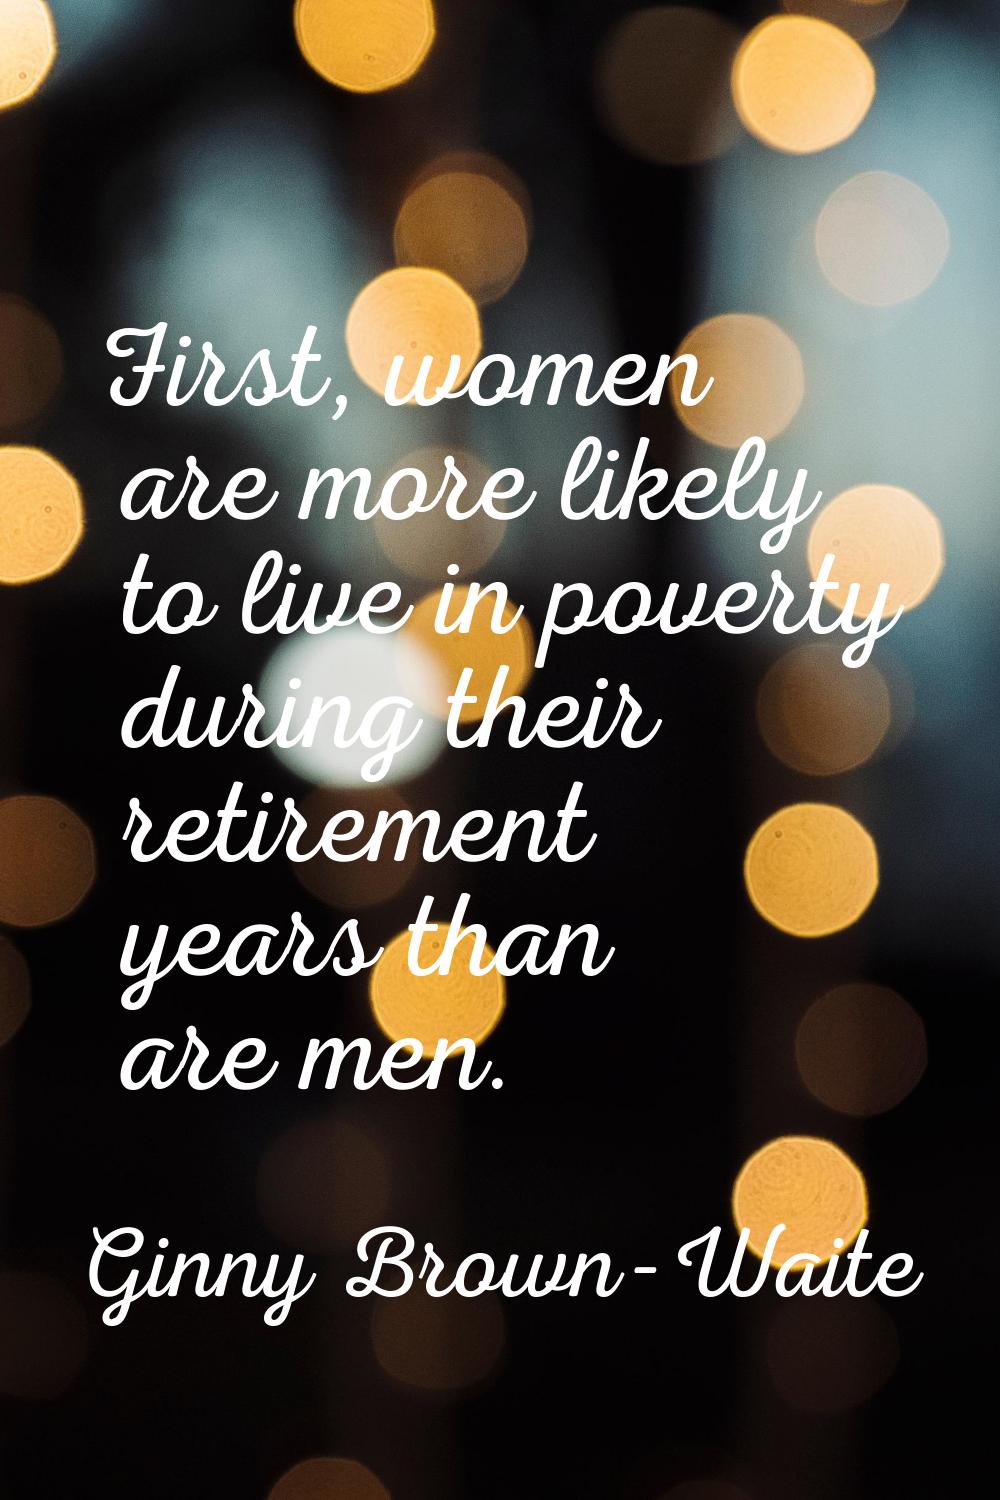 First, women are more likely to live in poverty during their retirement years than are men.